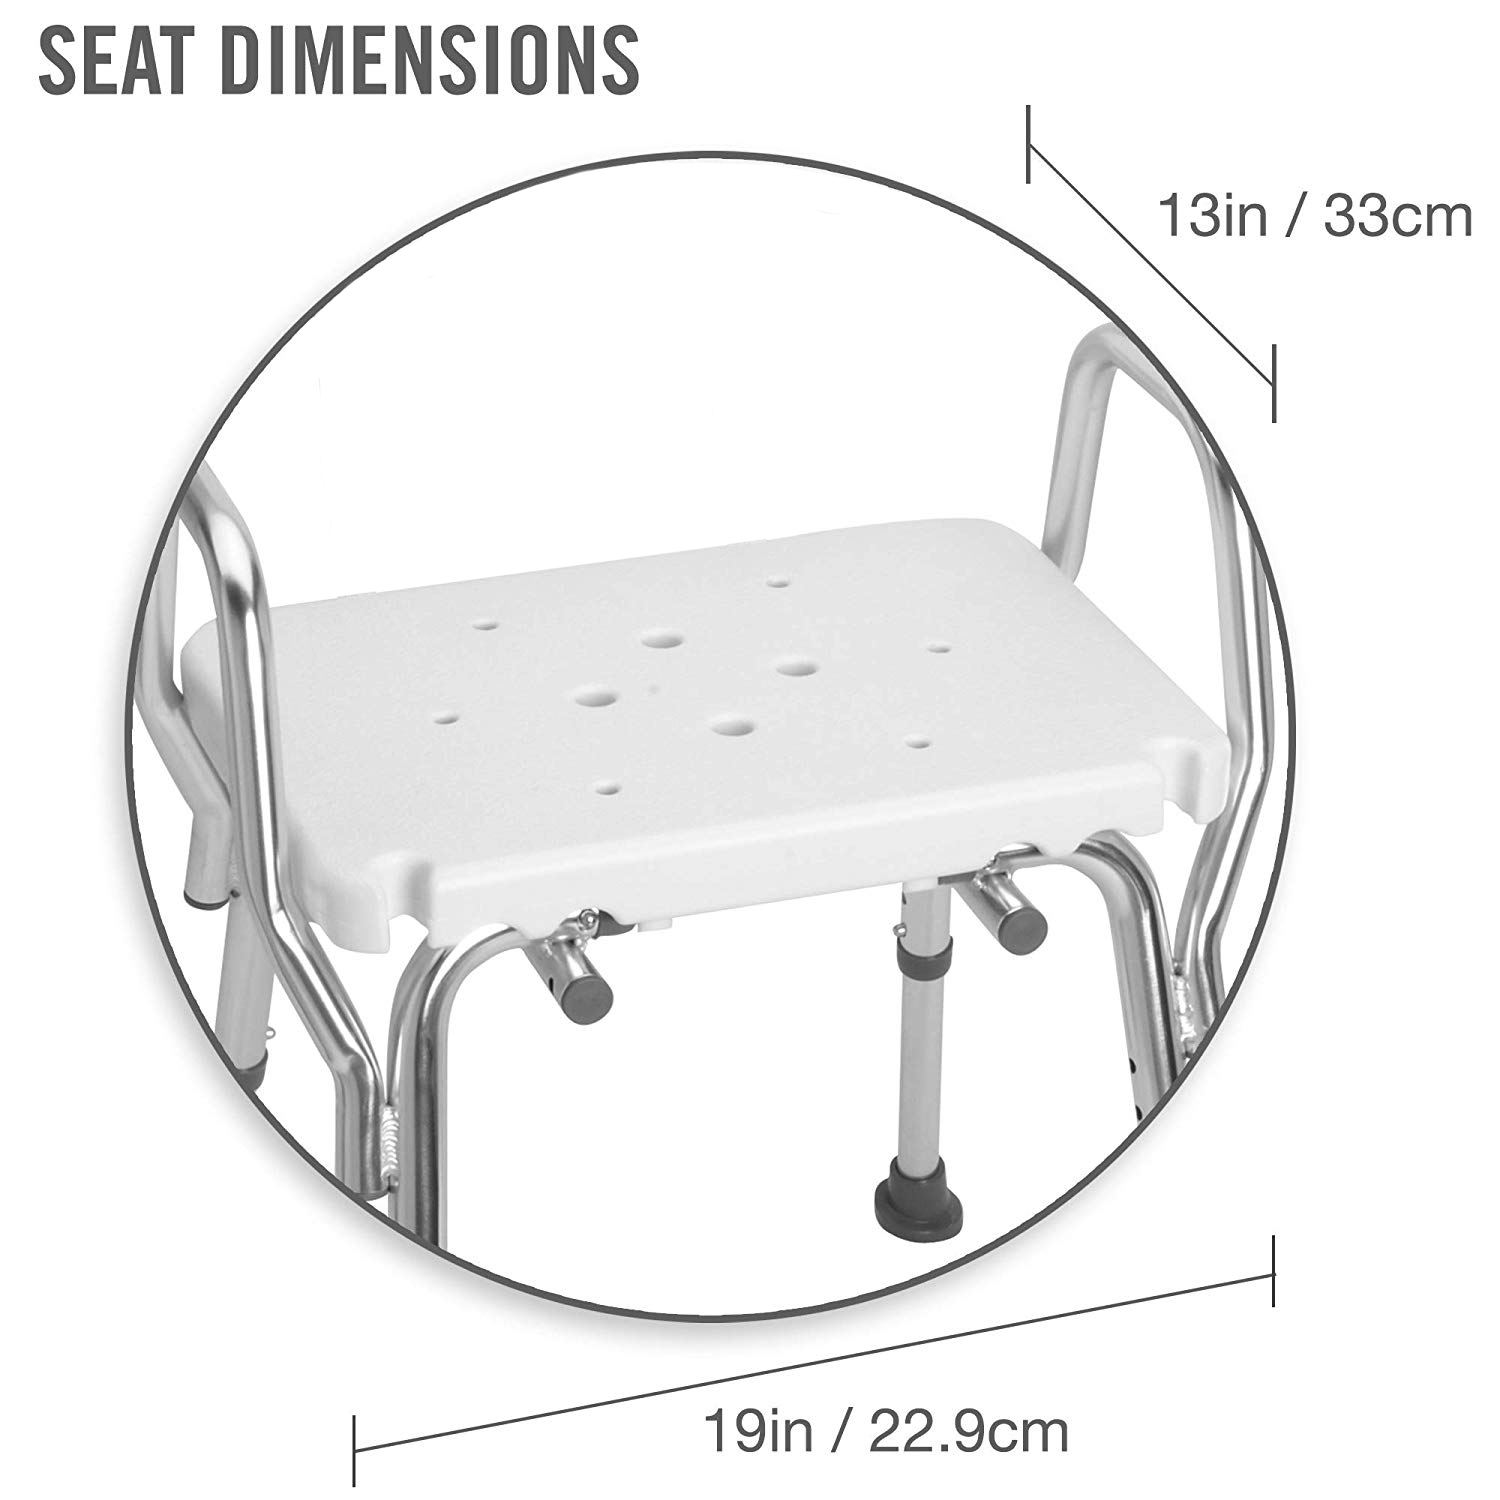 DMI Shower Chair, 16-20"H, 19 x 13 Seat, 350 lb Capacity - image 2 of 7